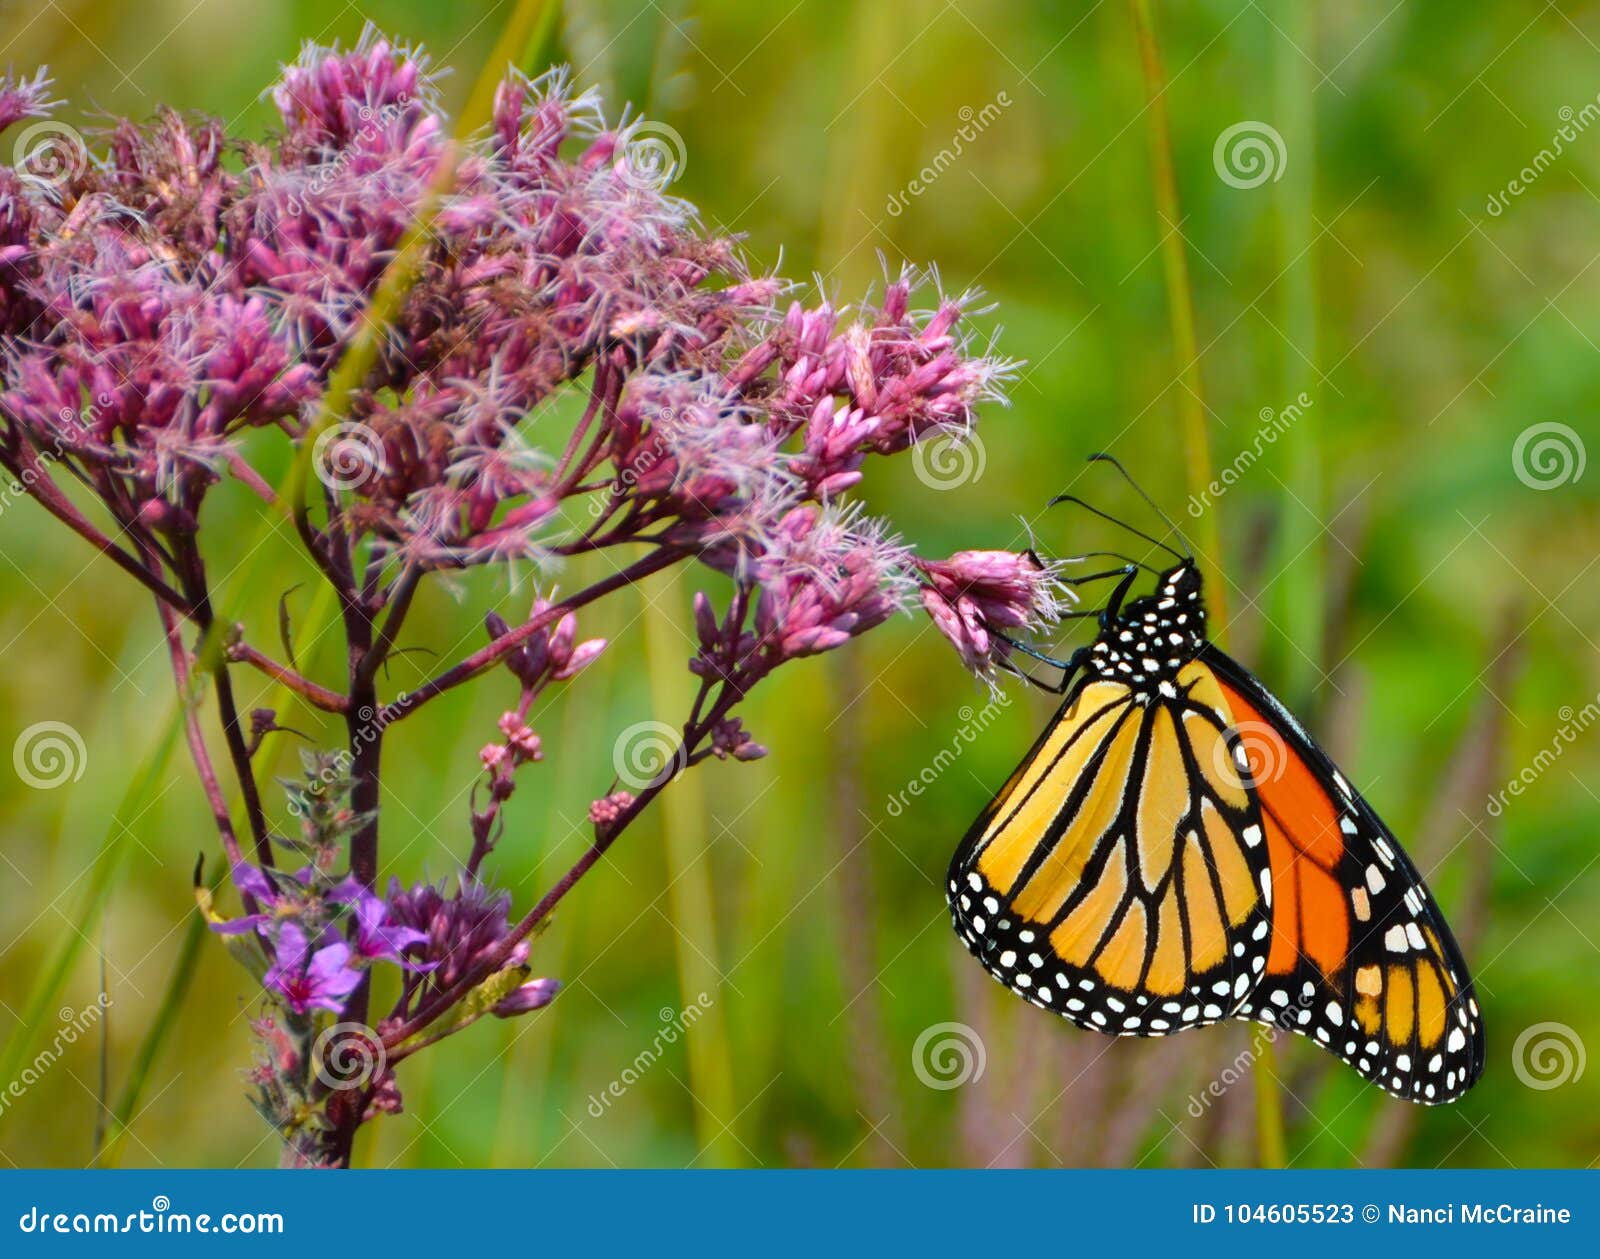 brightly colored monarch clutching joe pye weed pink flower